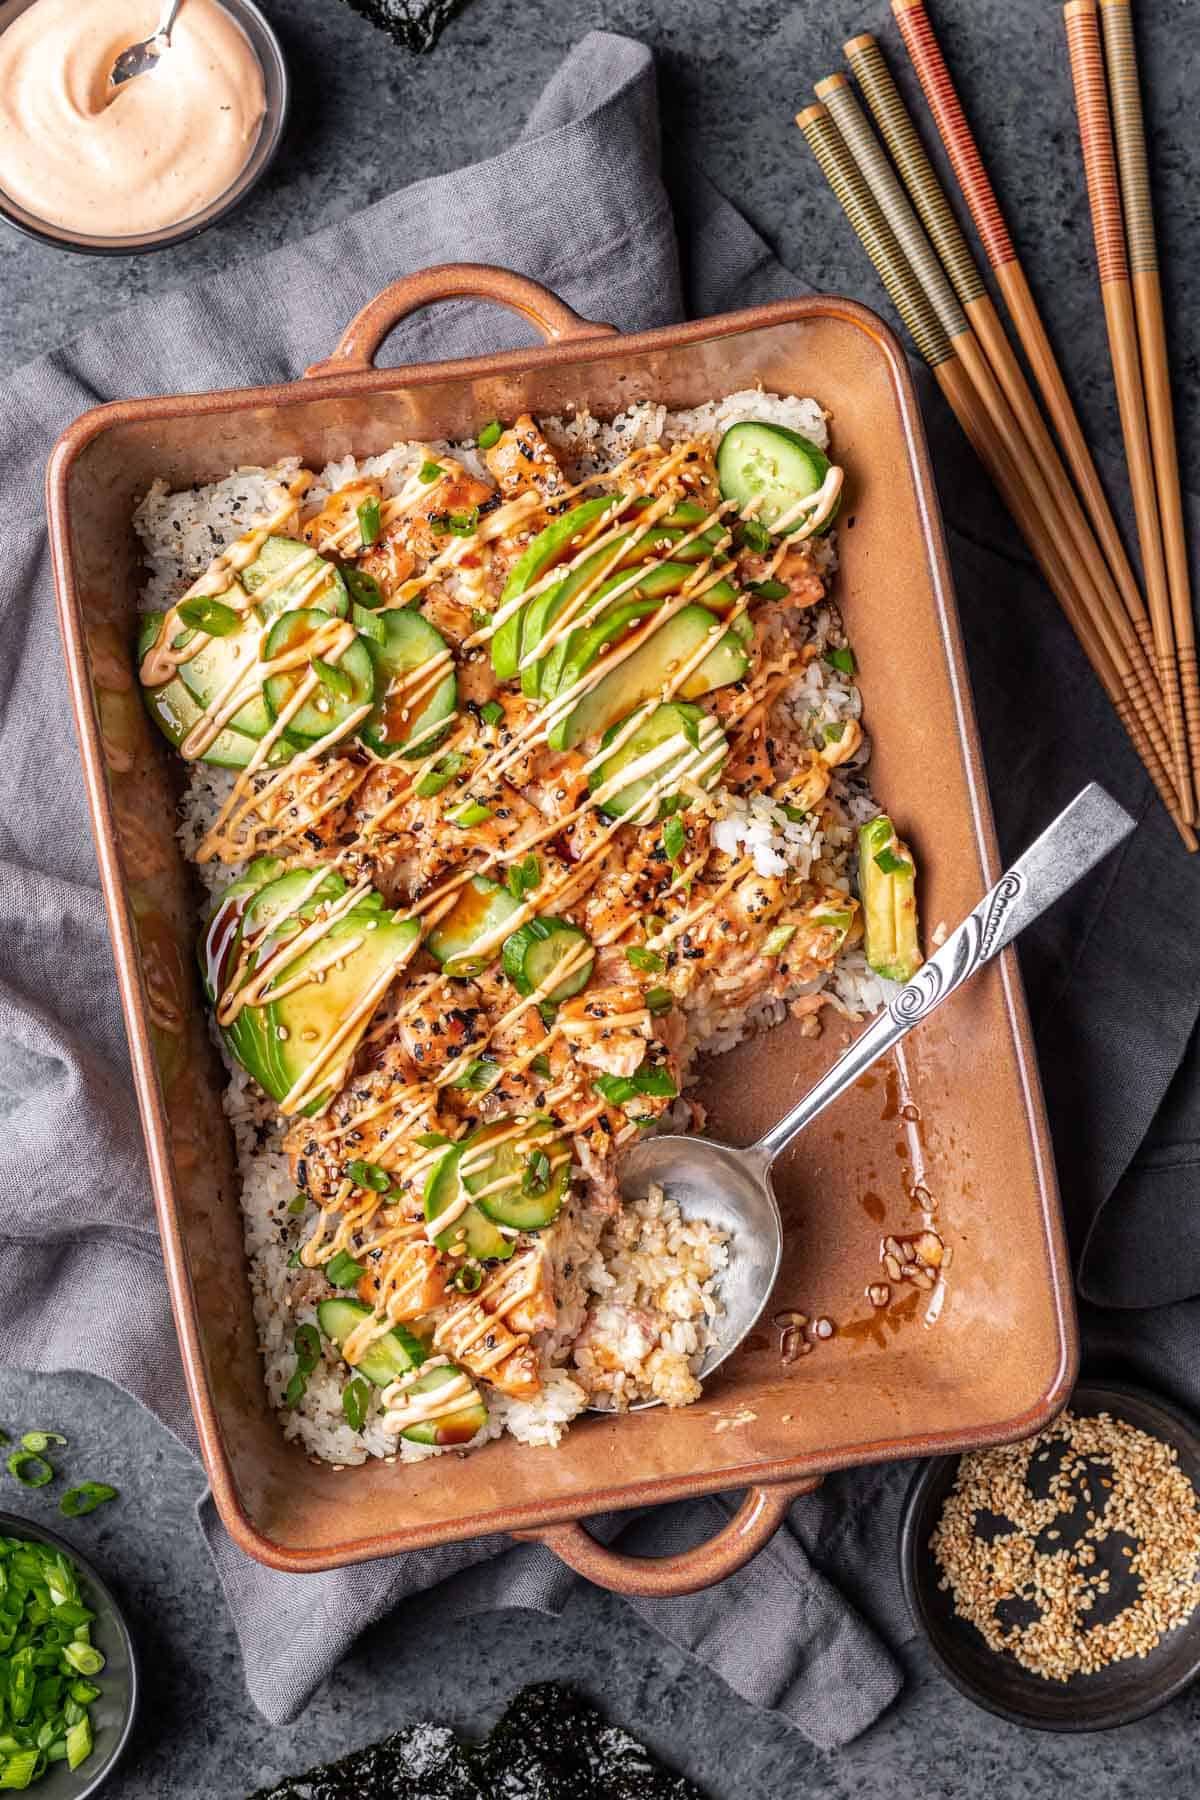 Salmon sushi bake in a baking dish with a serving spoon.